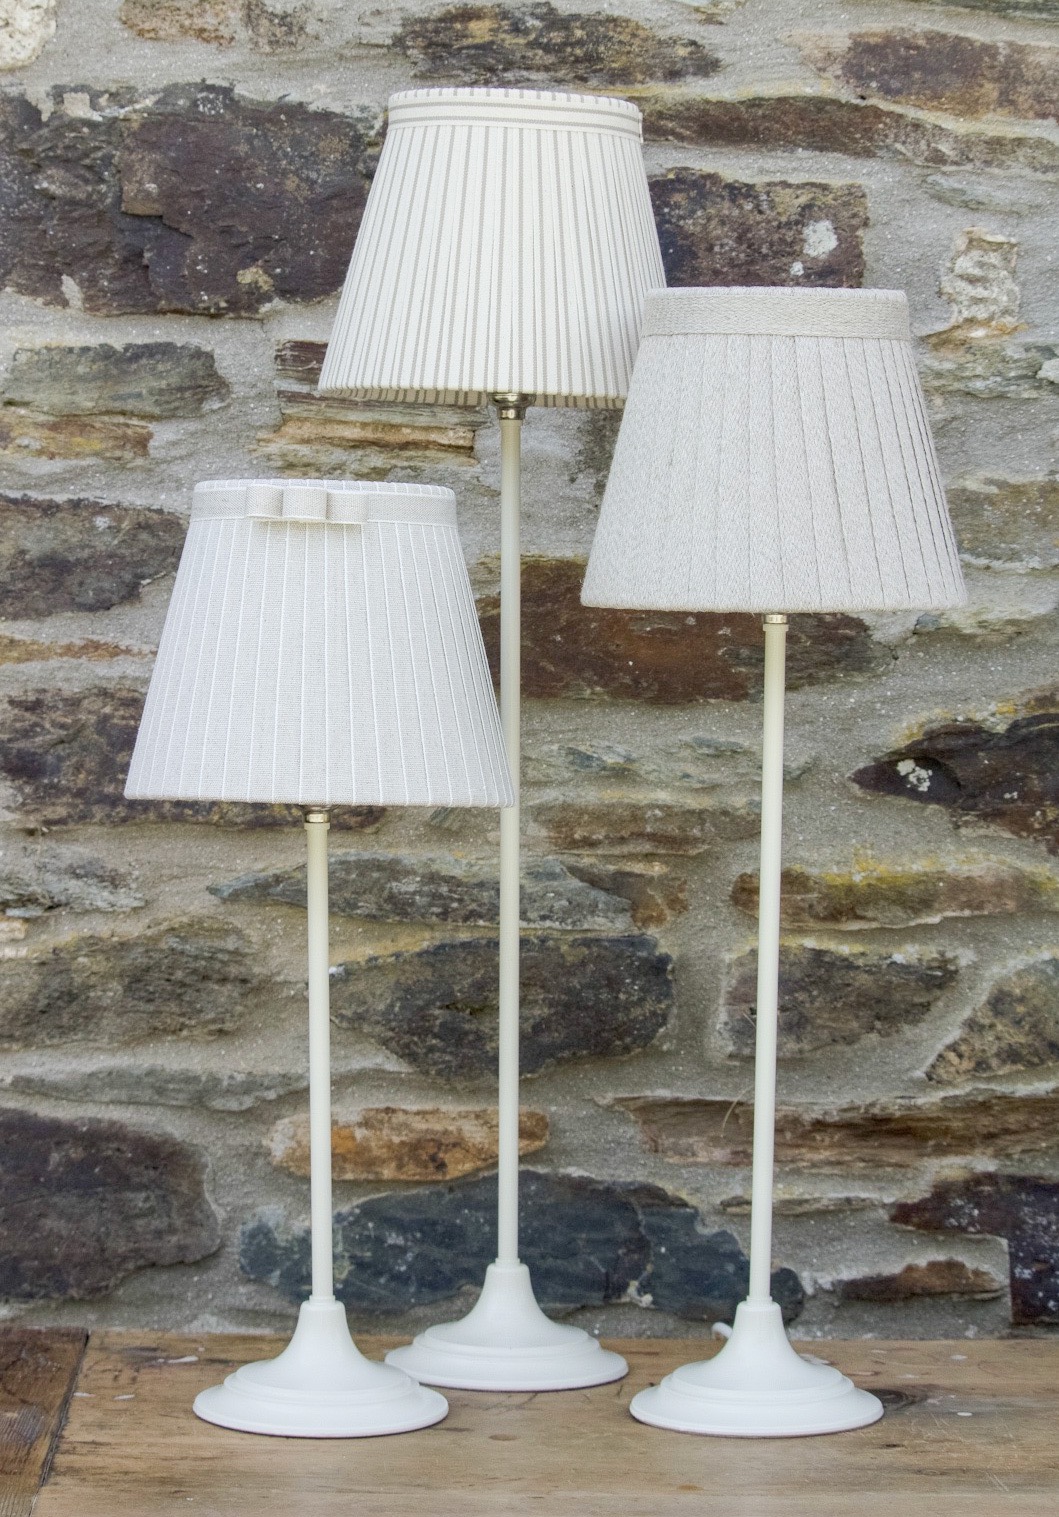 Calstock assorted sizes lampbases ivory metal painted metalware. www.bay-design.co.uk